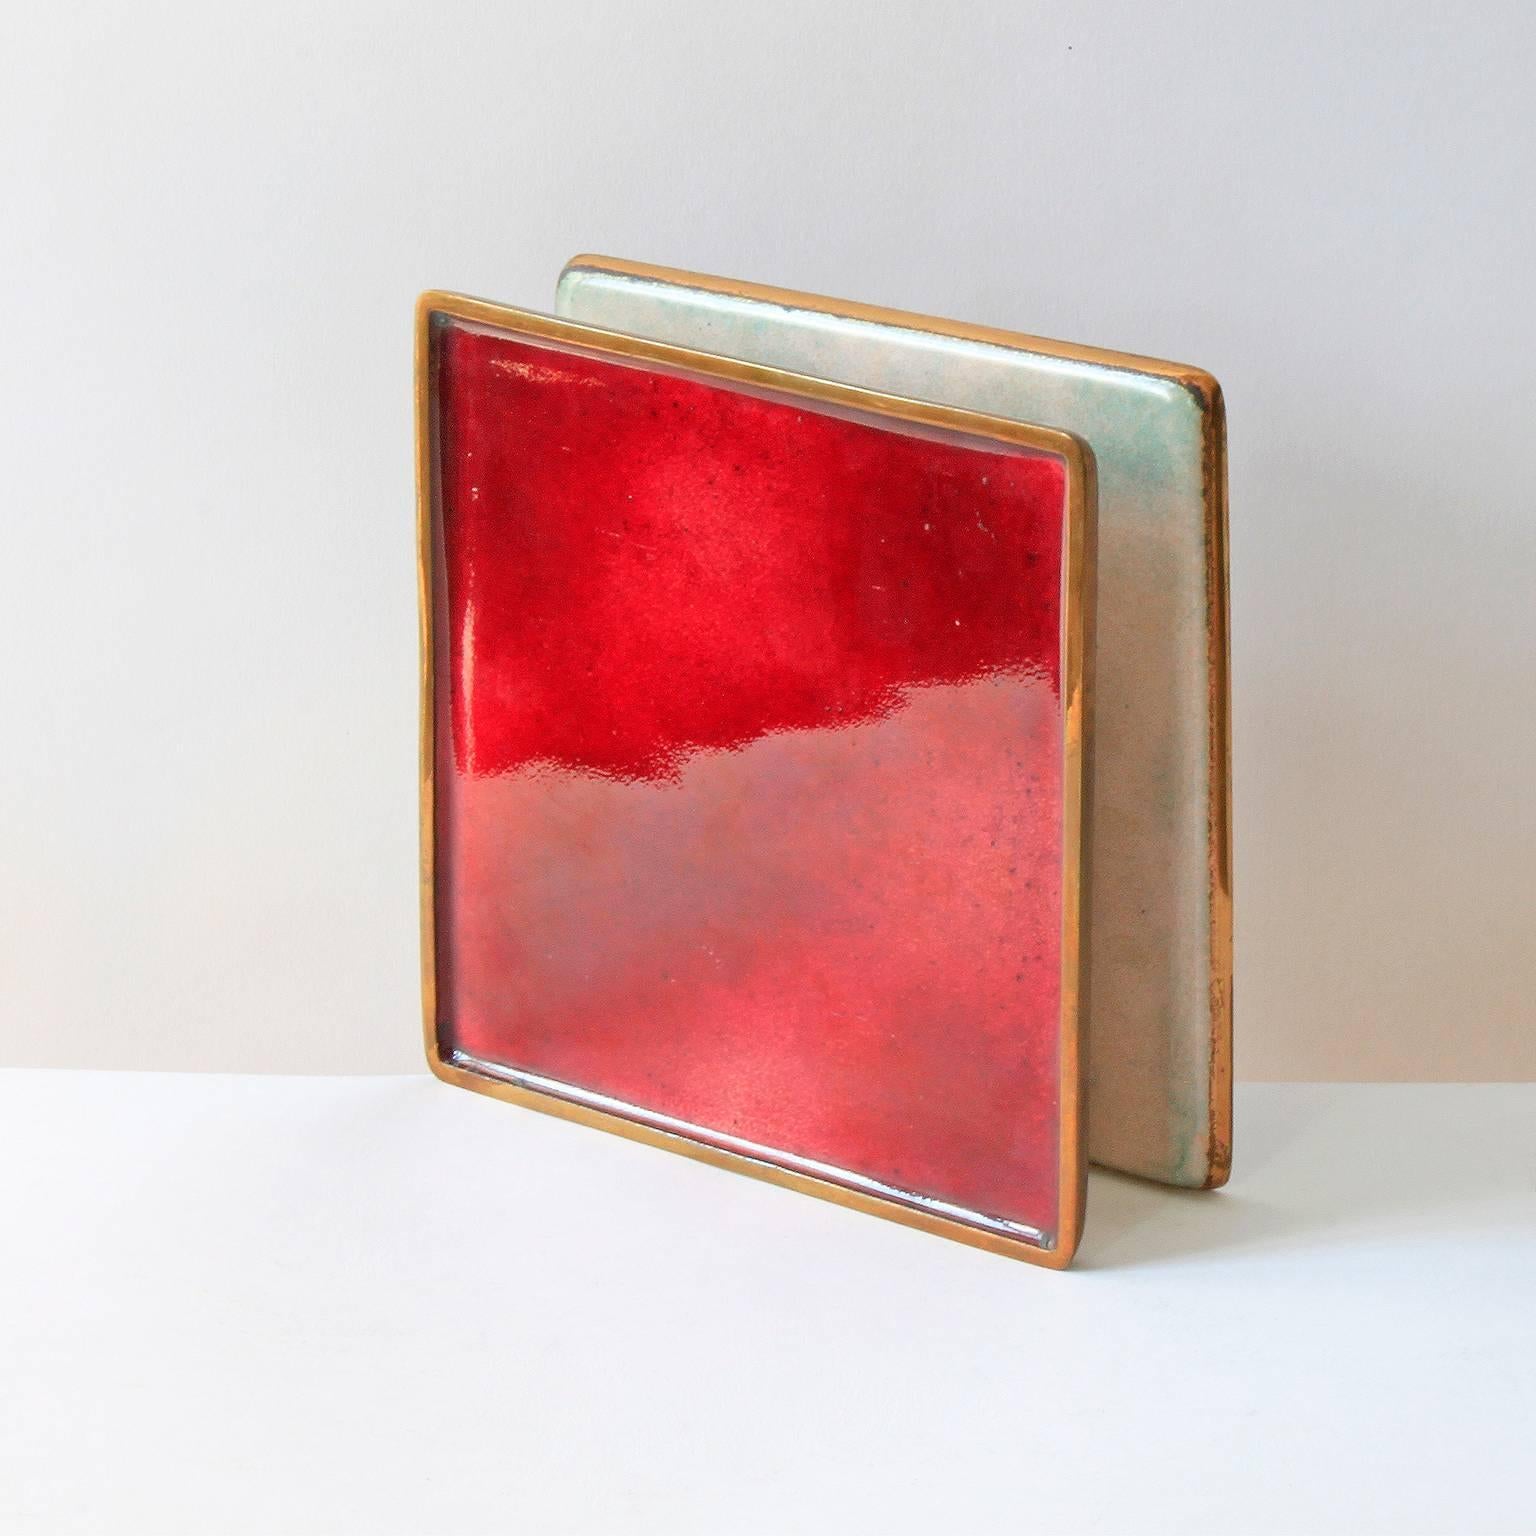 Spectacular door handles in hand-polished enamel on brass created in collaboration by two of Italy's most important 20th century designers, Gio Ponti and Paolo De Poli. This example features a deep red glaze on the exterior surfaces and a